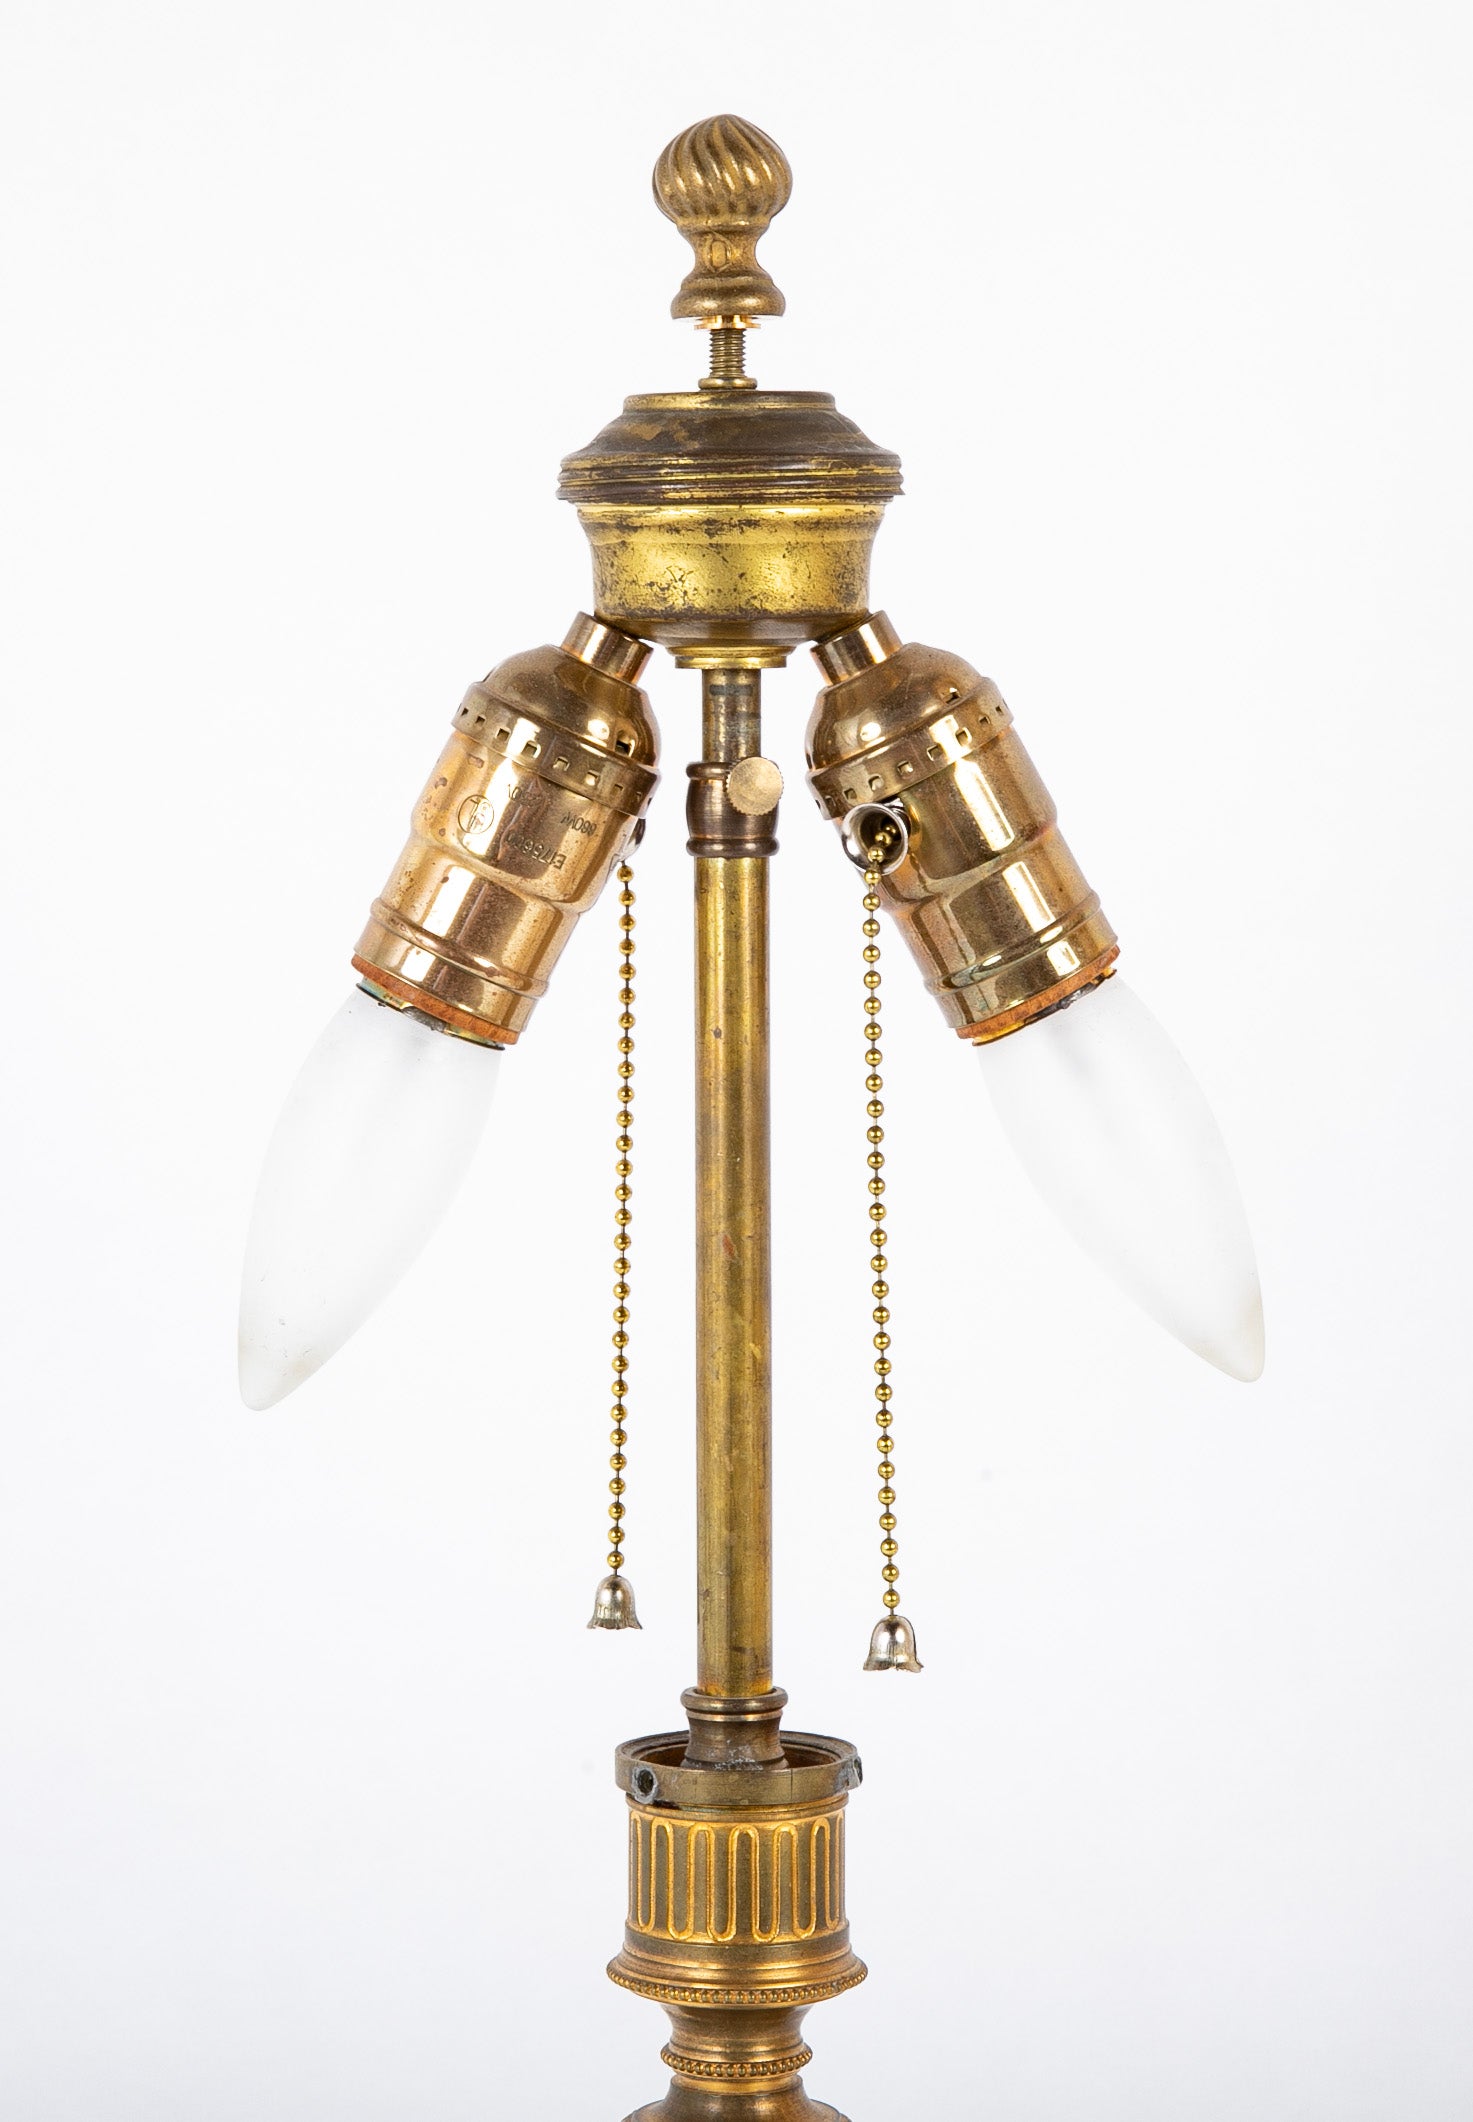 Late 19th - Early 20th Century Gilt Candlestick Now a Lamp